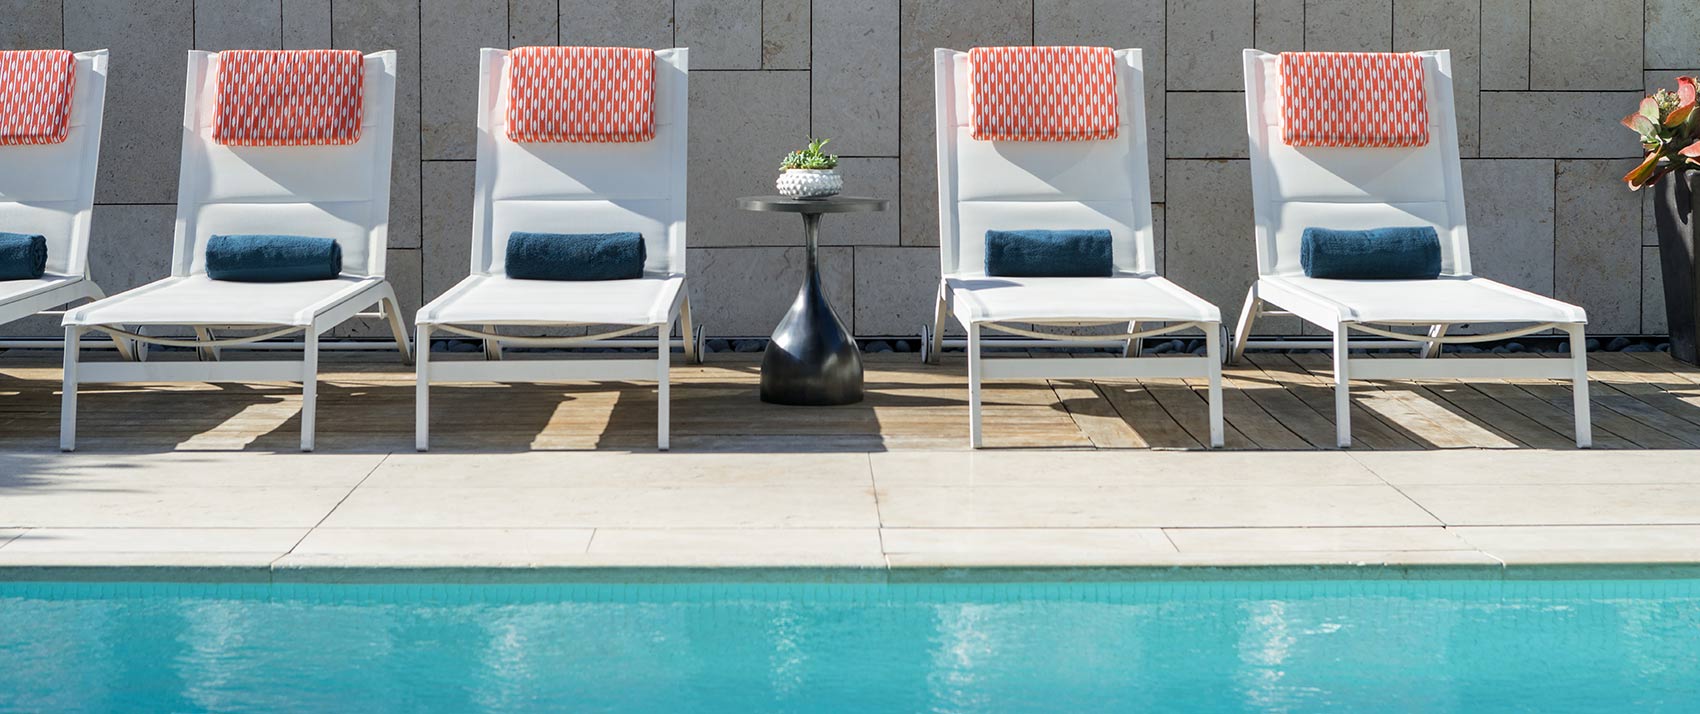 Hang by the pool this Fourth of July at Hotel Palomar. 